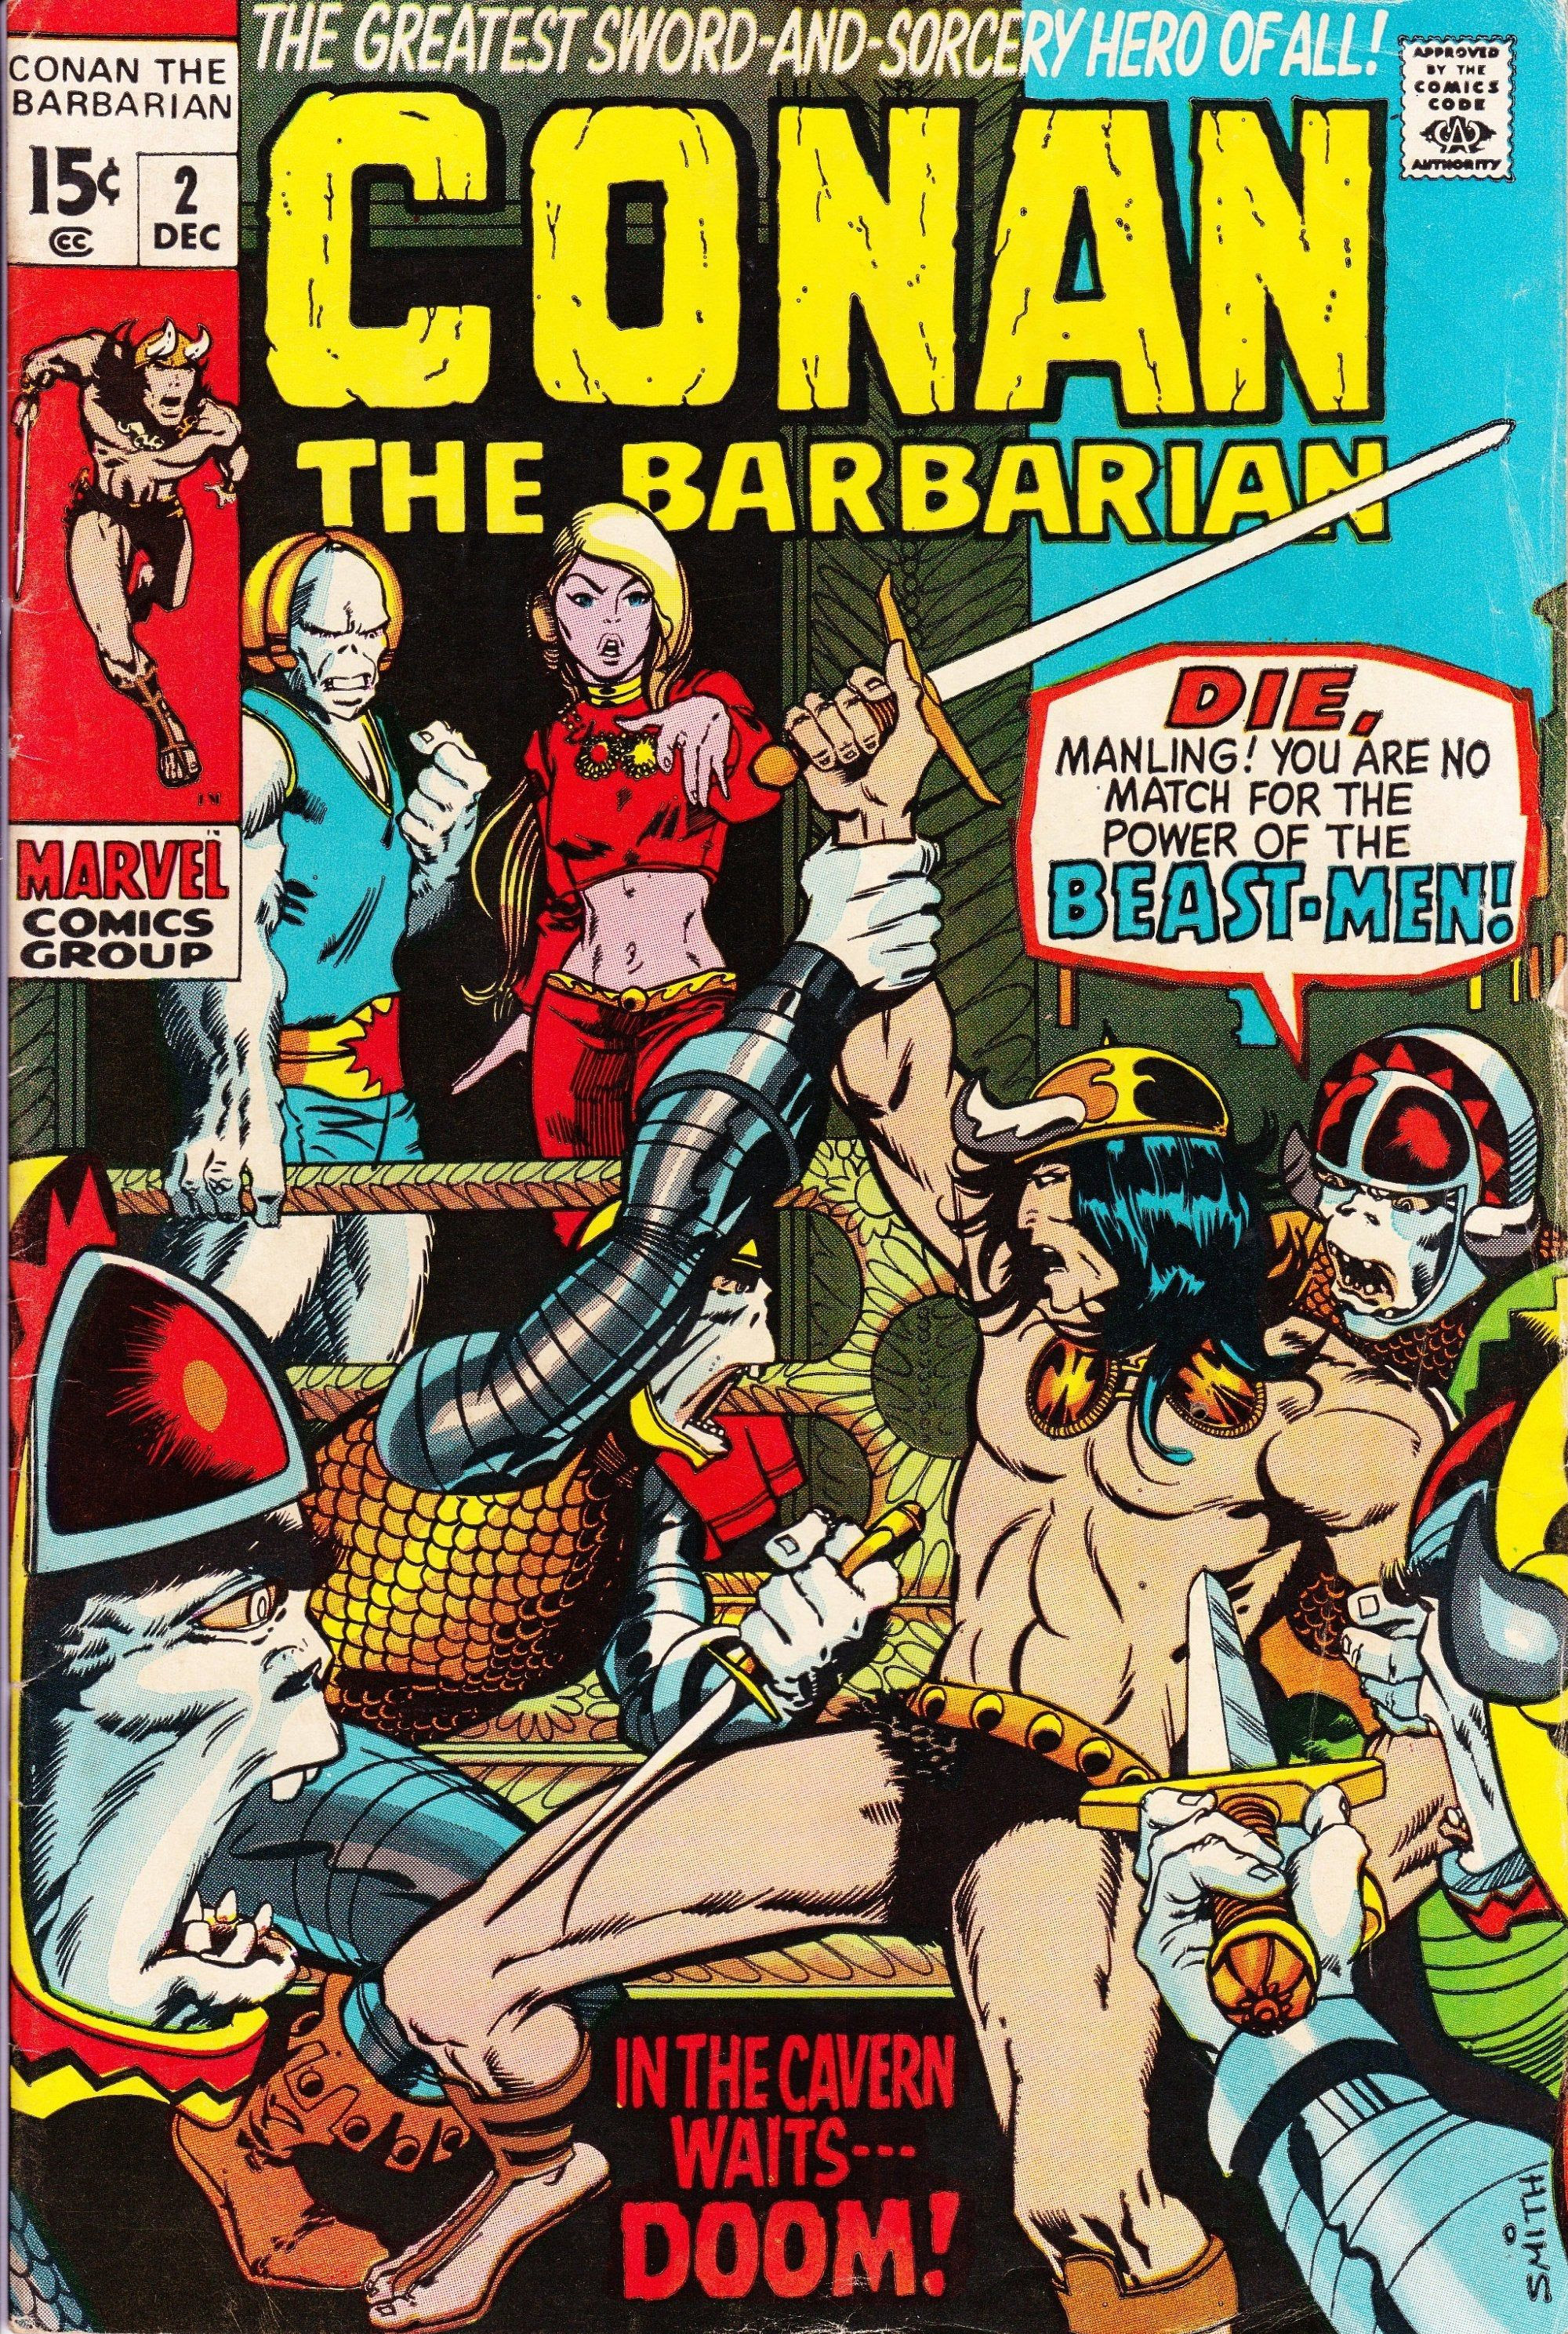 Conan The Barbarian #2, cover, art by Barry Windsor-Smith